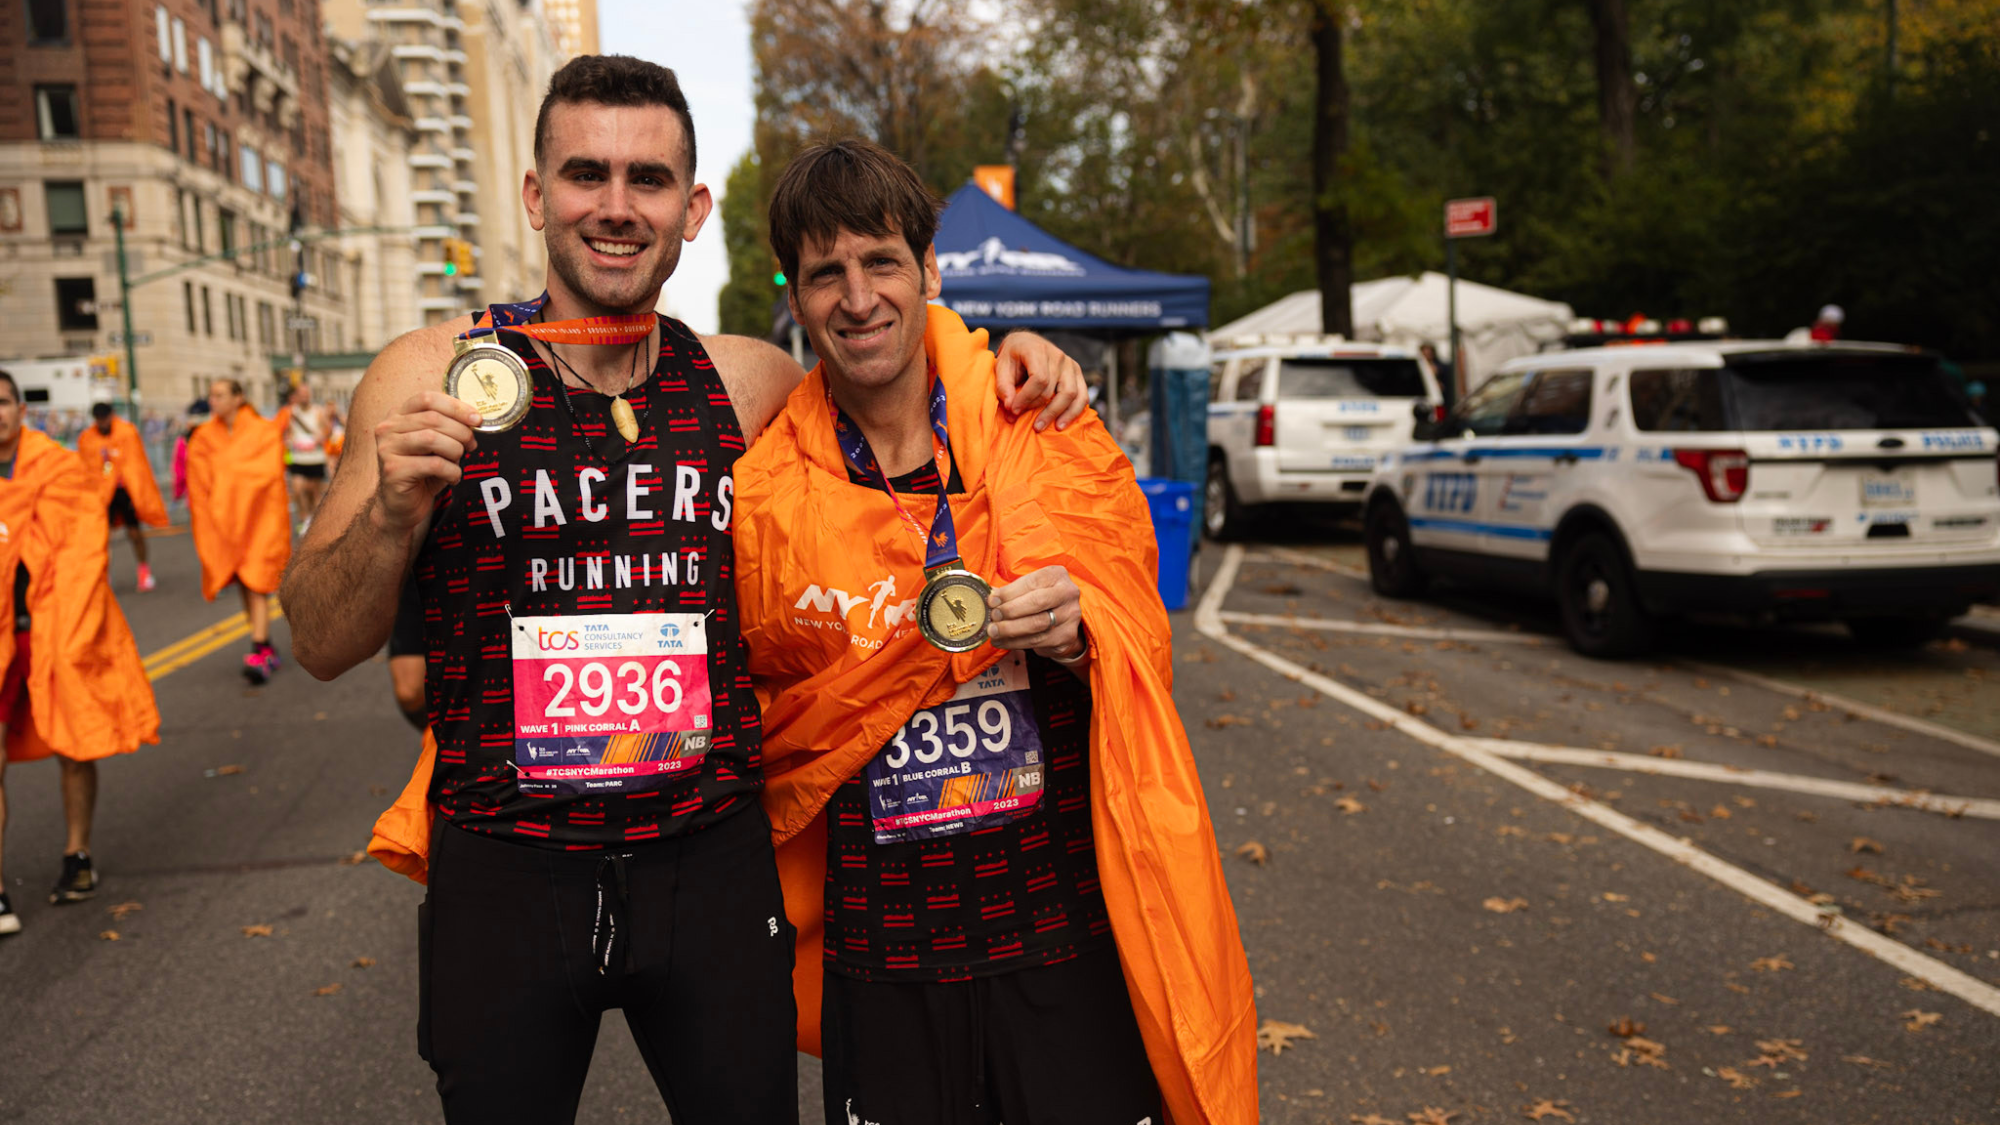 Two men with arms around each other after finishing the New York Marathon. One man is Chris Farley, the owner of Pacers Running. He is holding his medal and smiling.